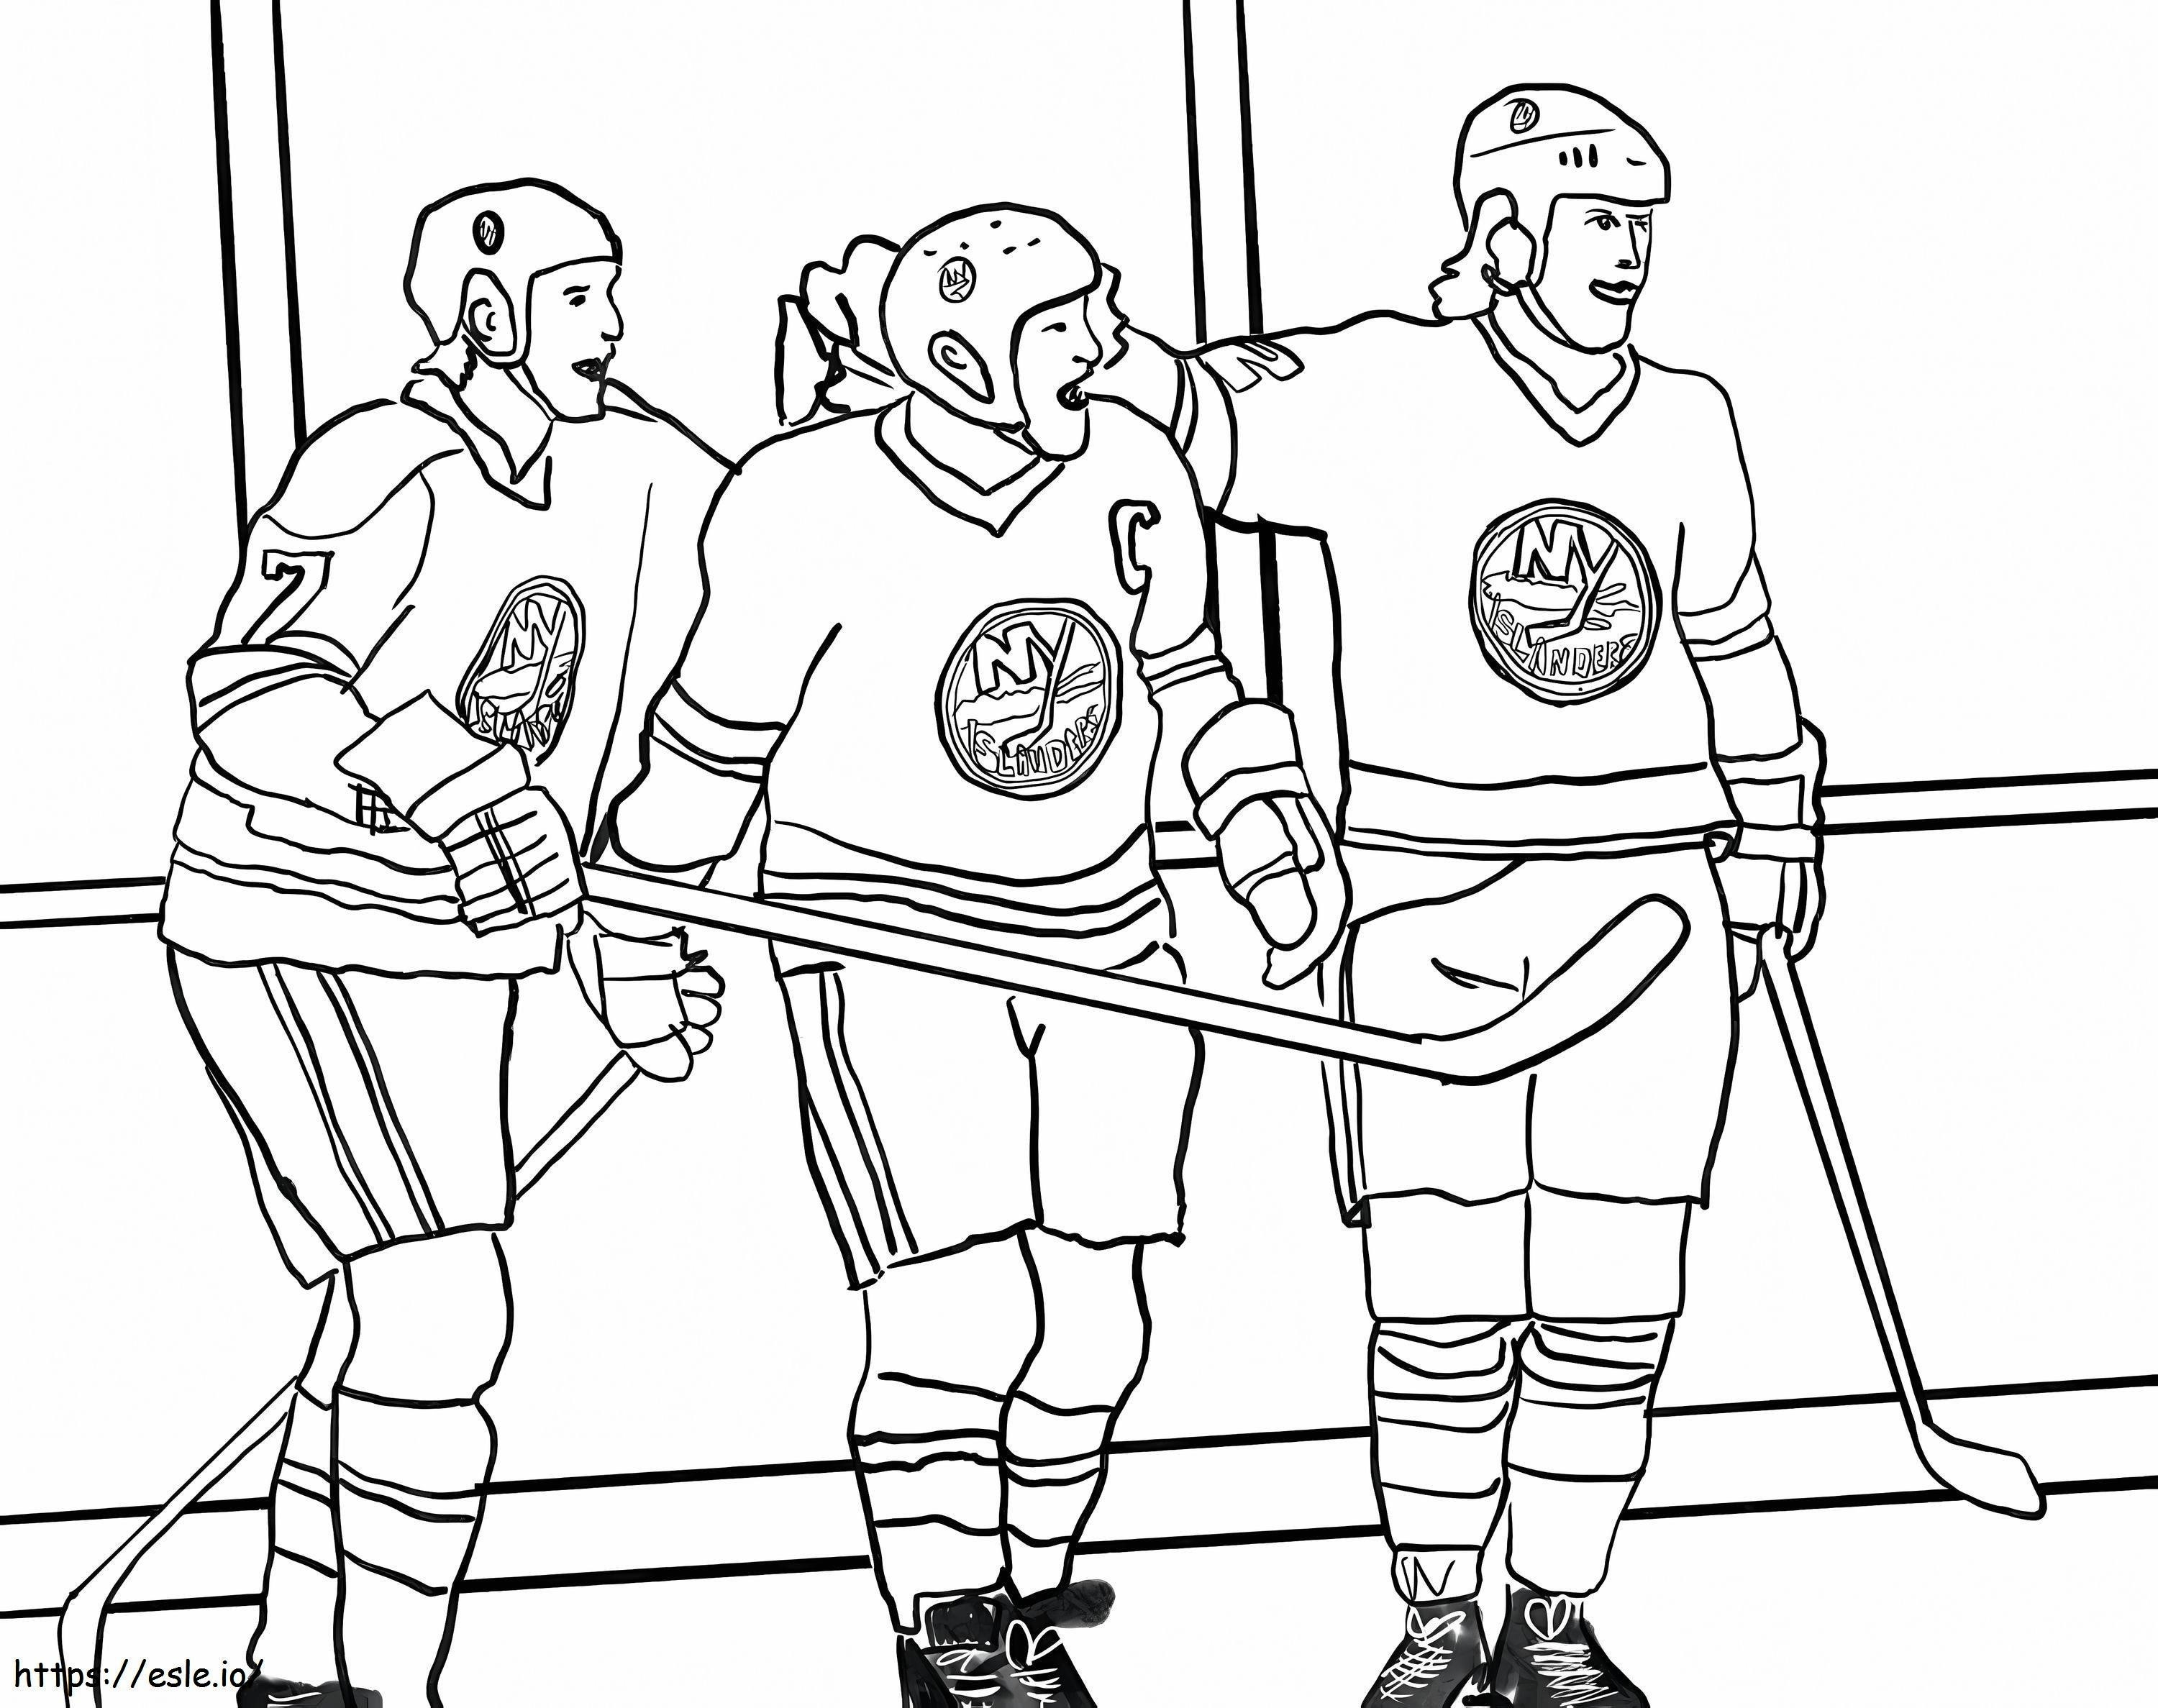 Three Hockey Players coloring page